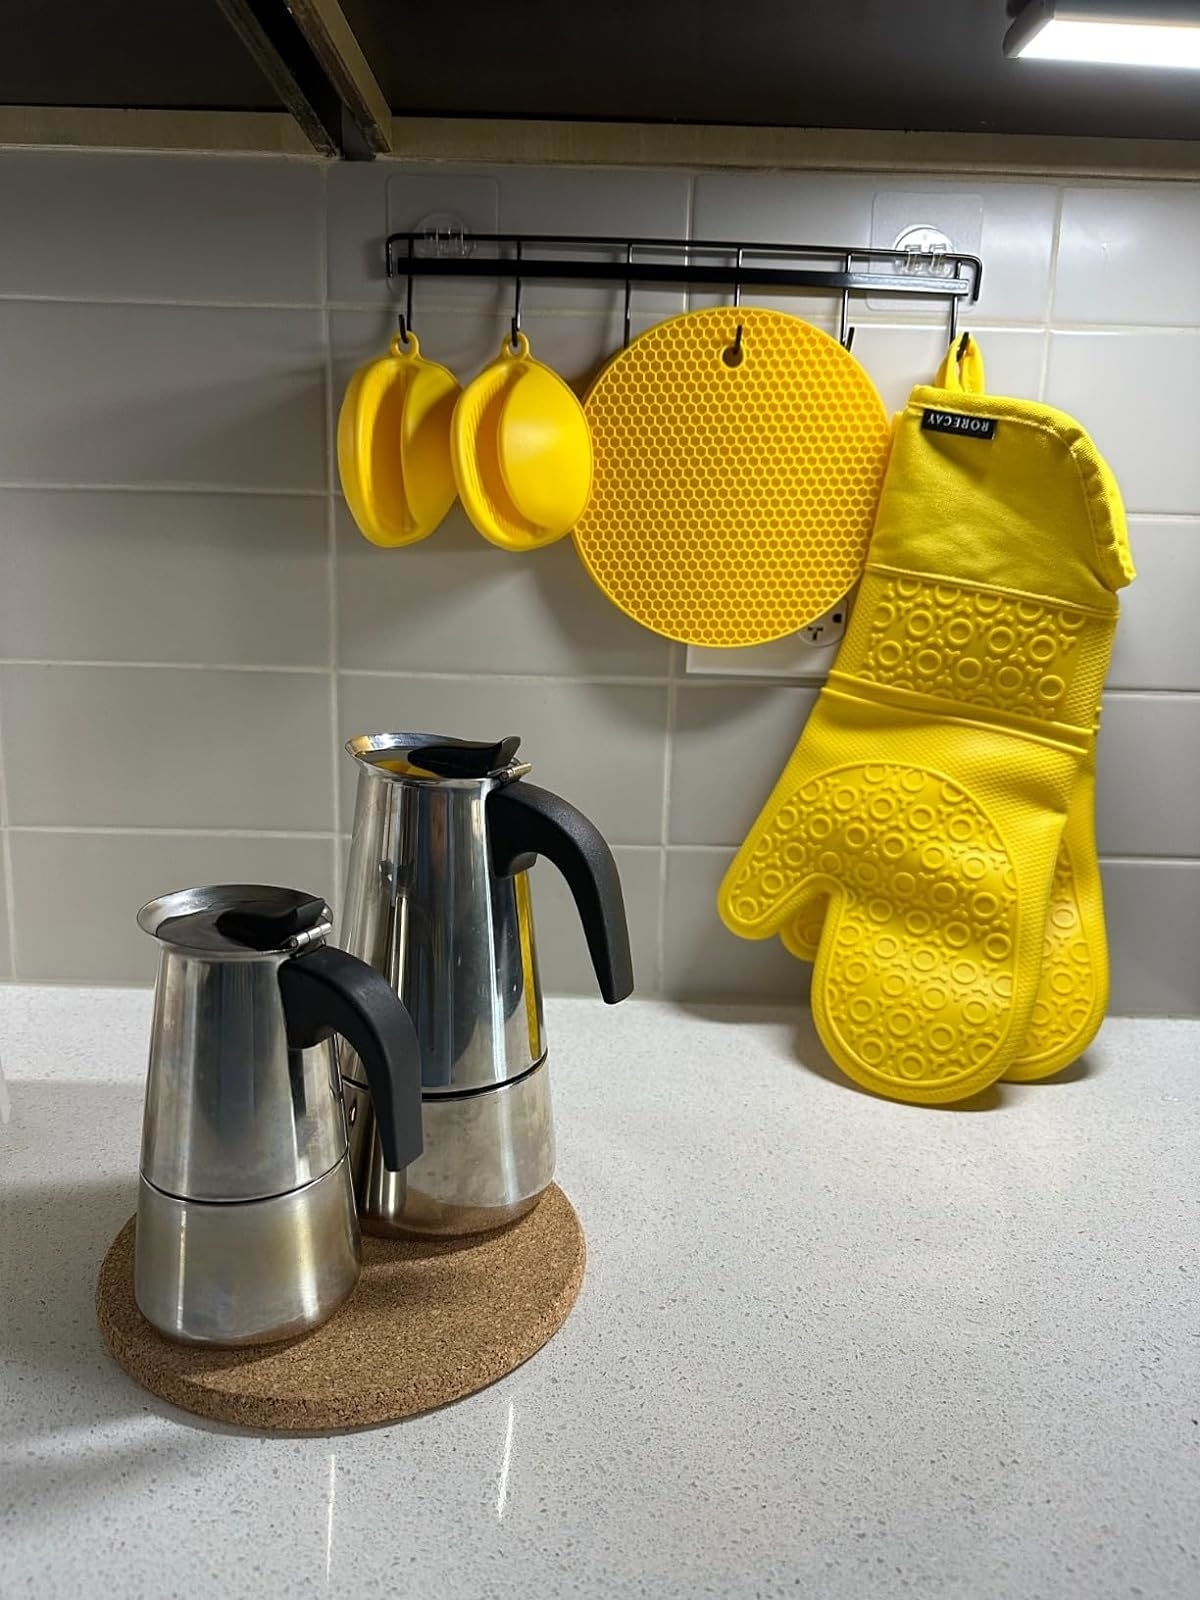 Two stainless steel coffee pots on a cork trivet, beside yellow oven mitts hanging on a kitchen rack